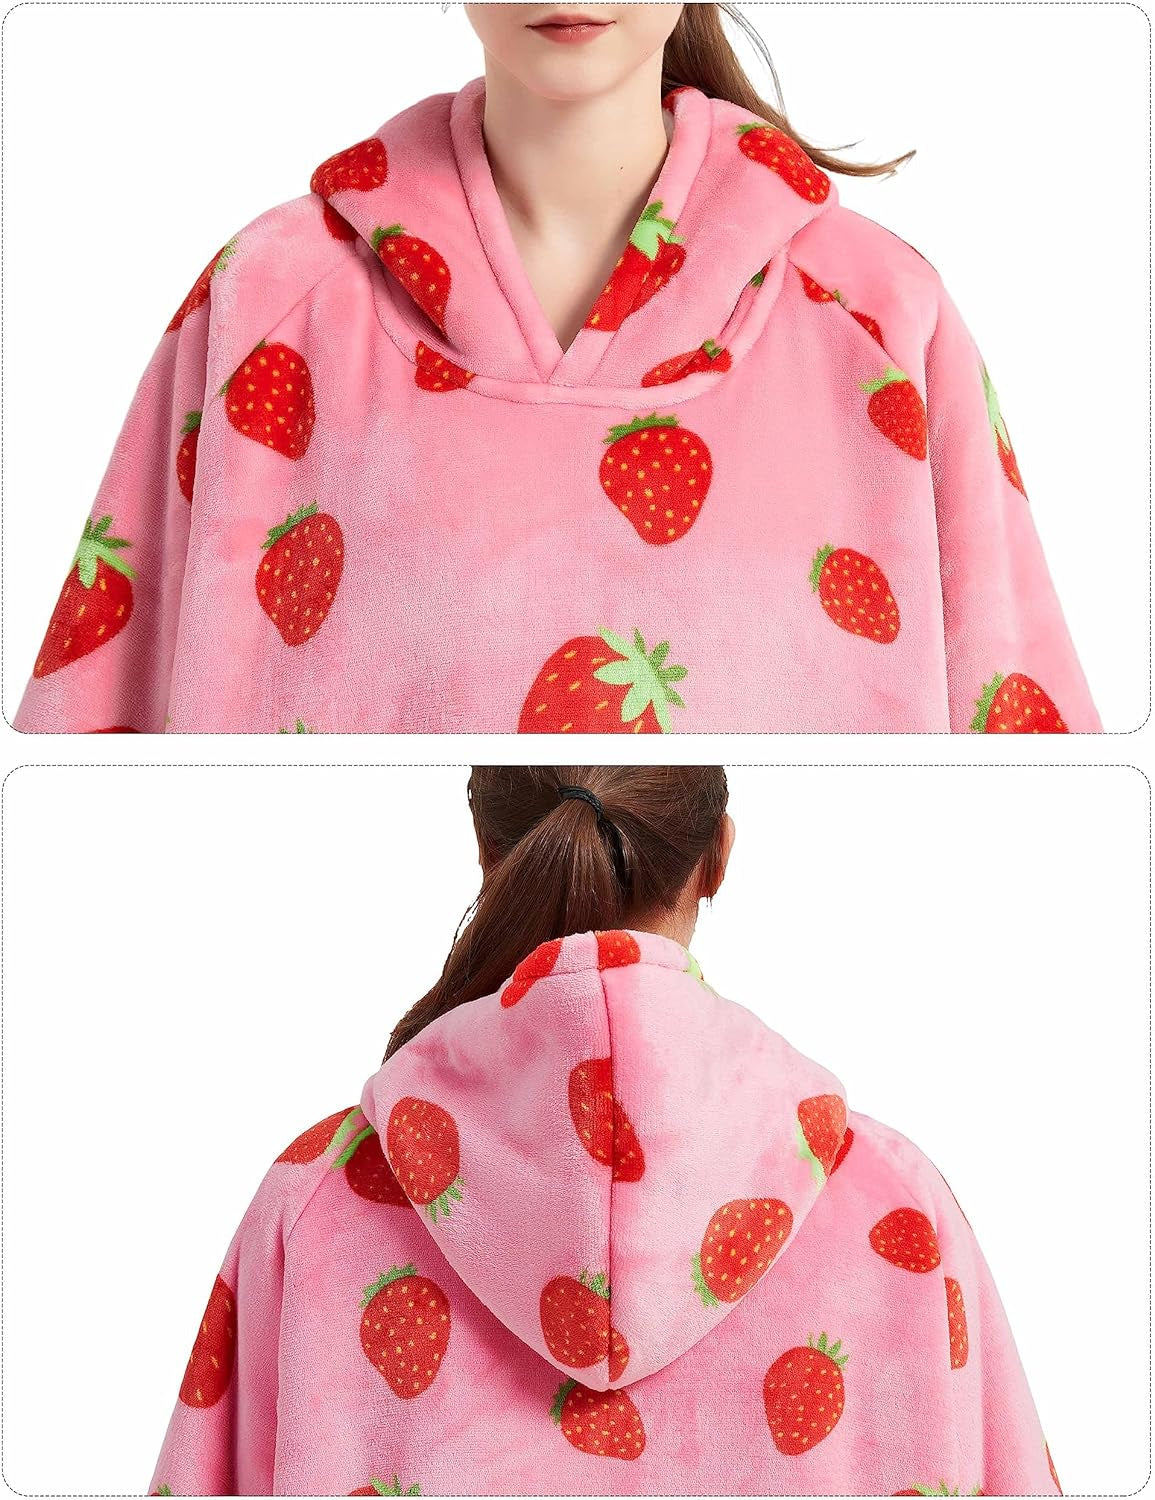 Wearable Blanket Hoodie Strawberry Pattern for Adult